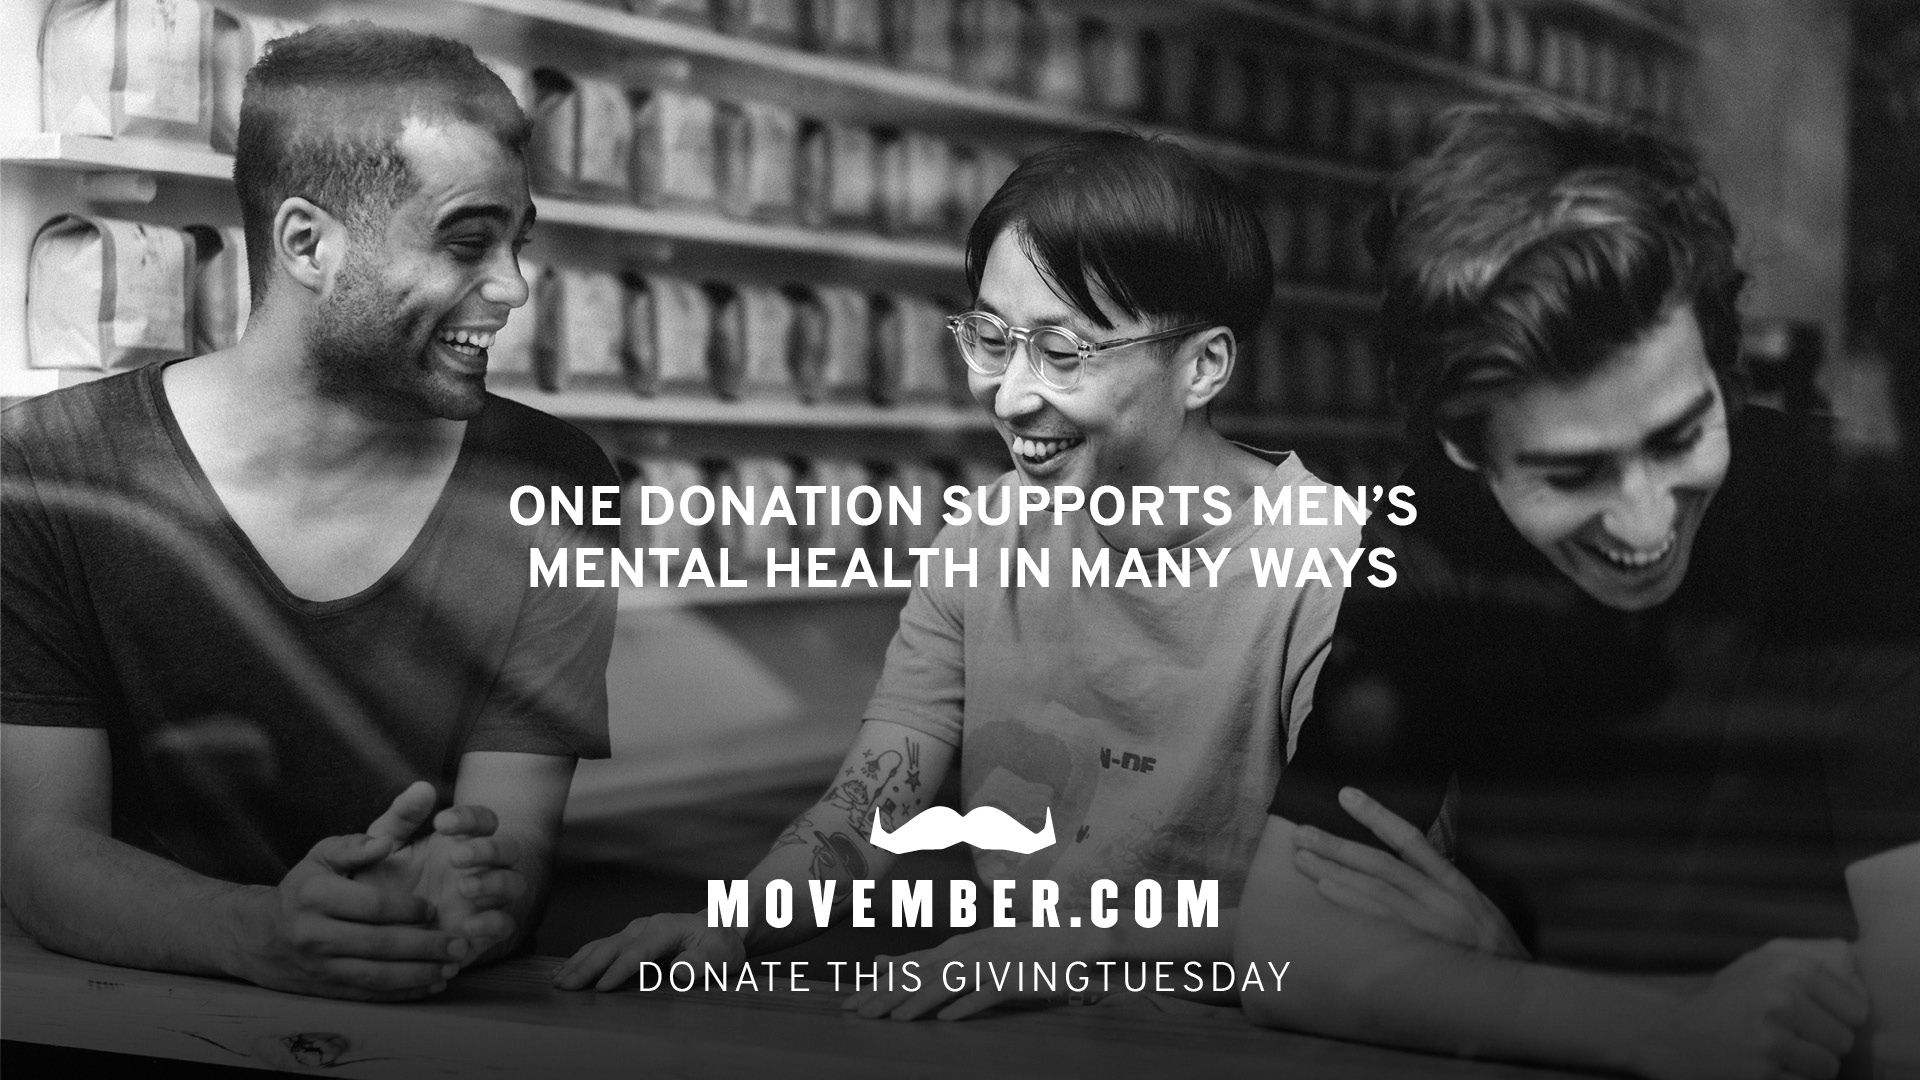 "One donation supports men's mental health in many ways"